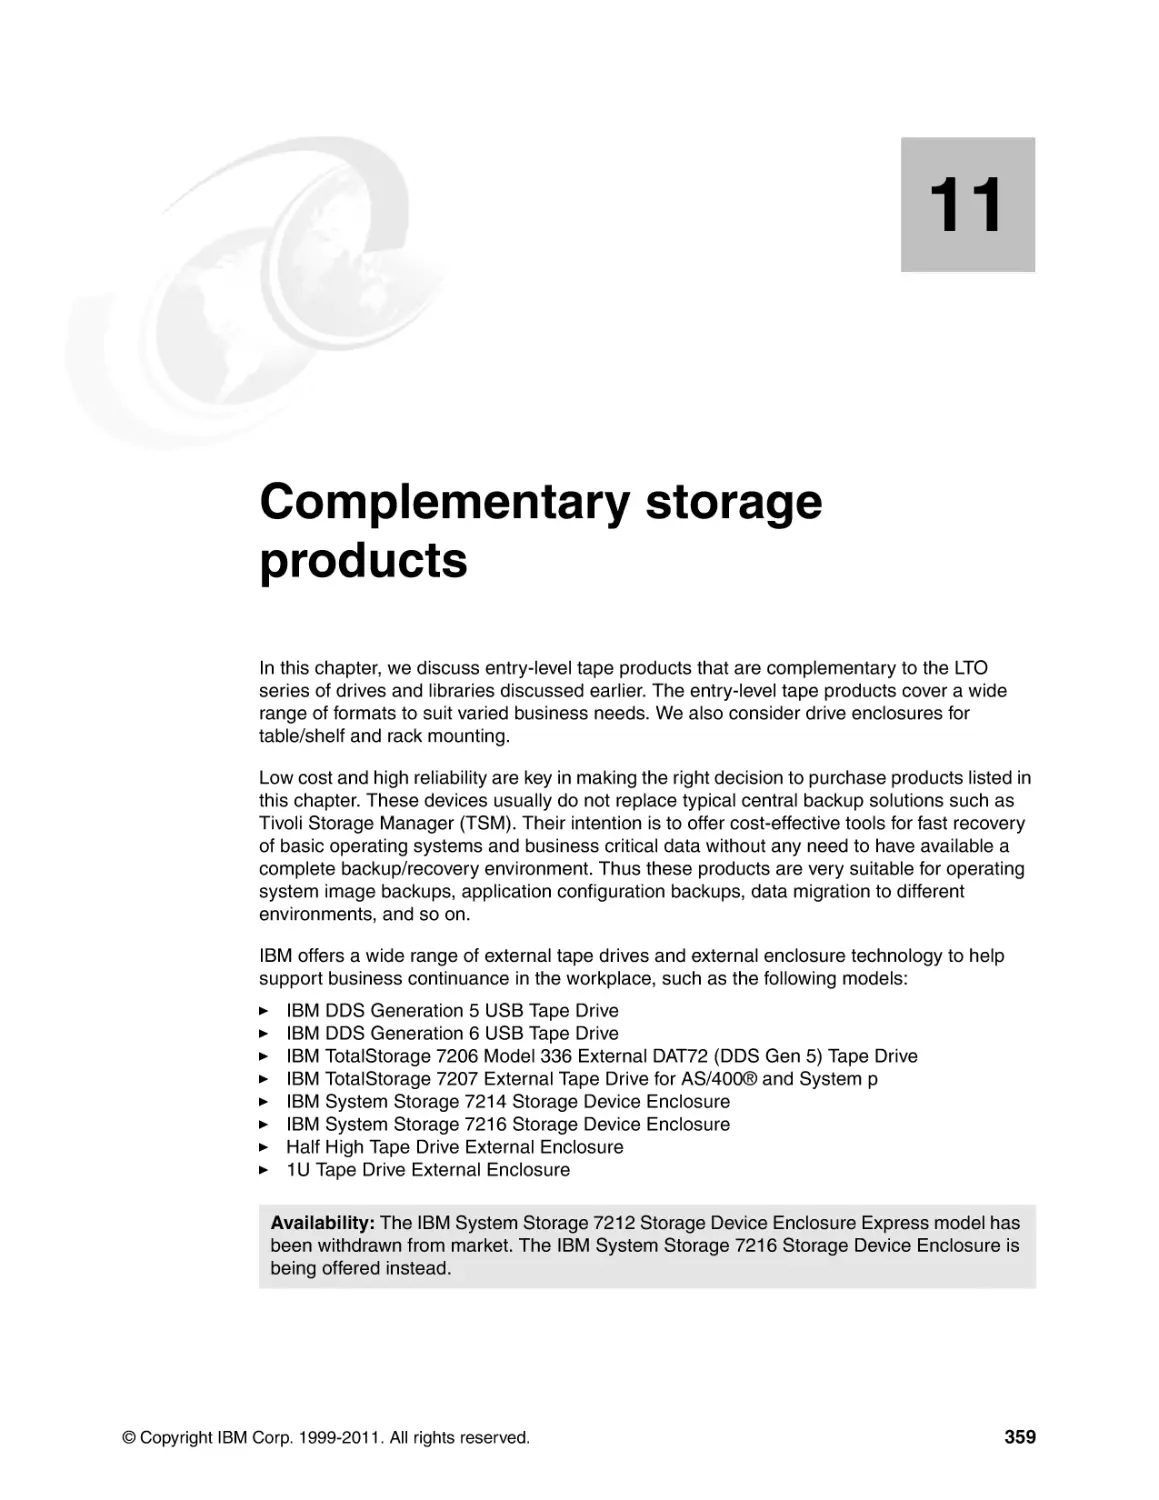 Chapter 11. Complementary storage products